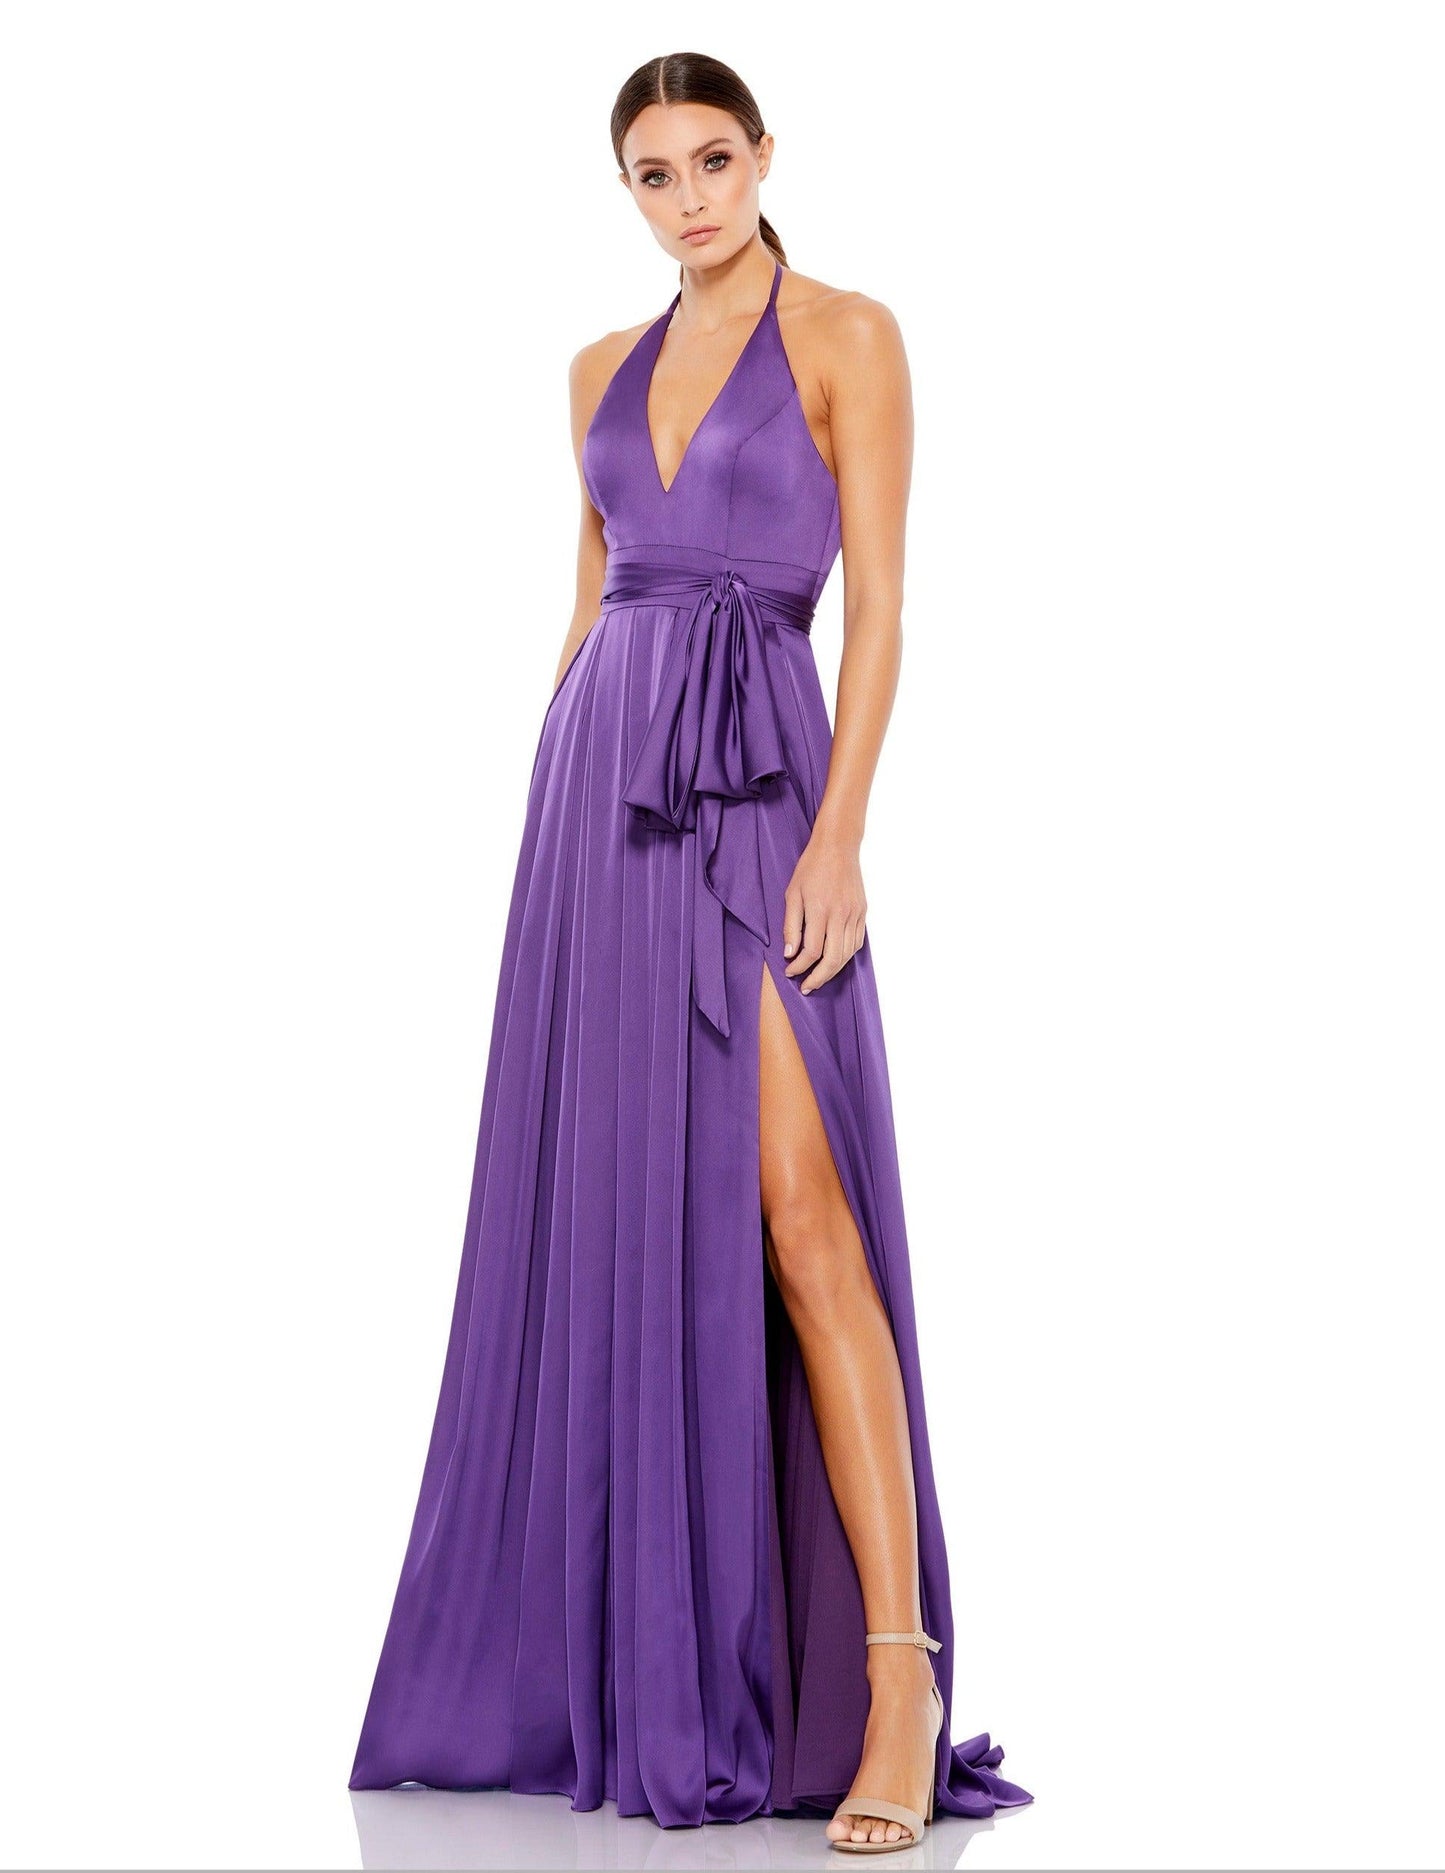 Mac Duggal Prom Long halter Pleated Dress 26531 - The Dress Outlet